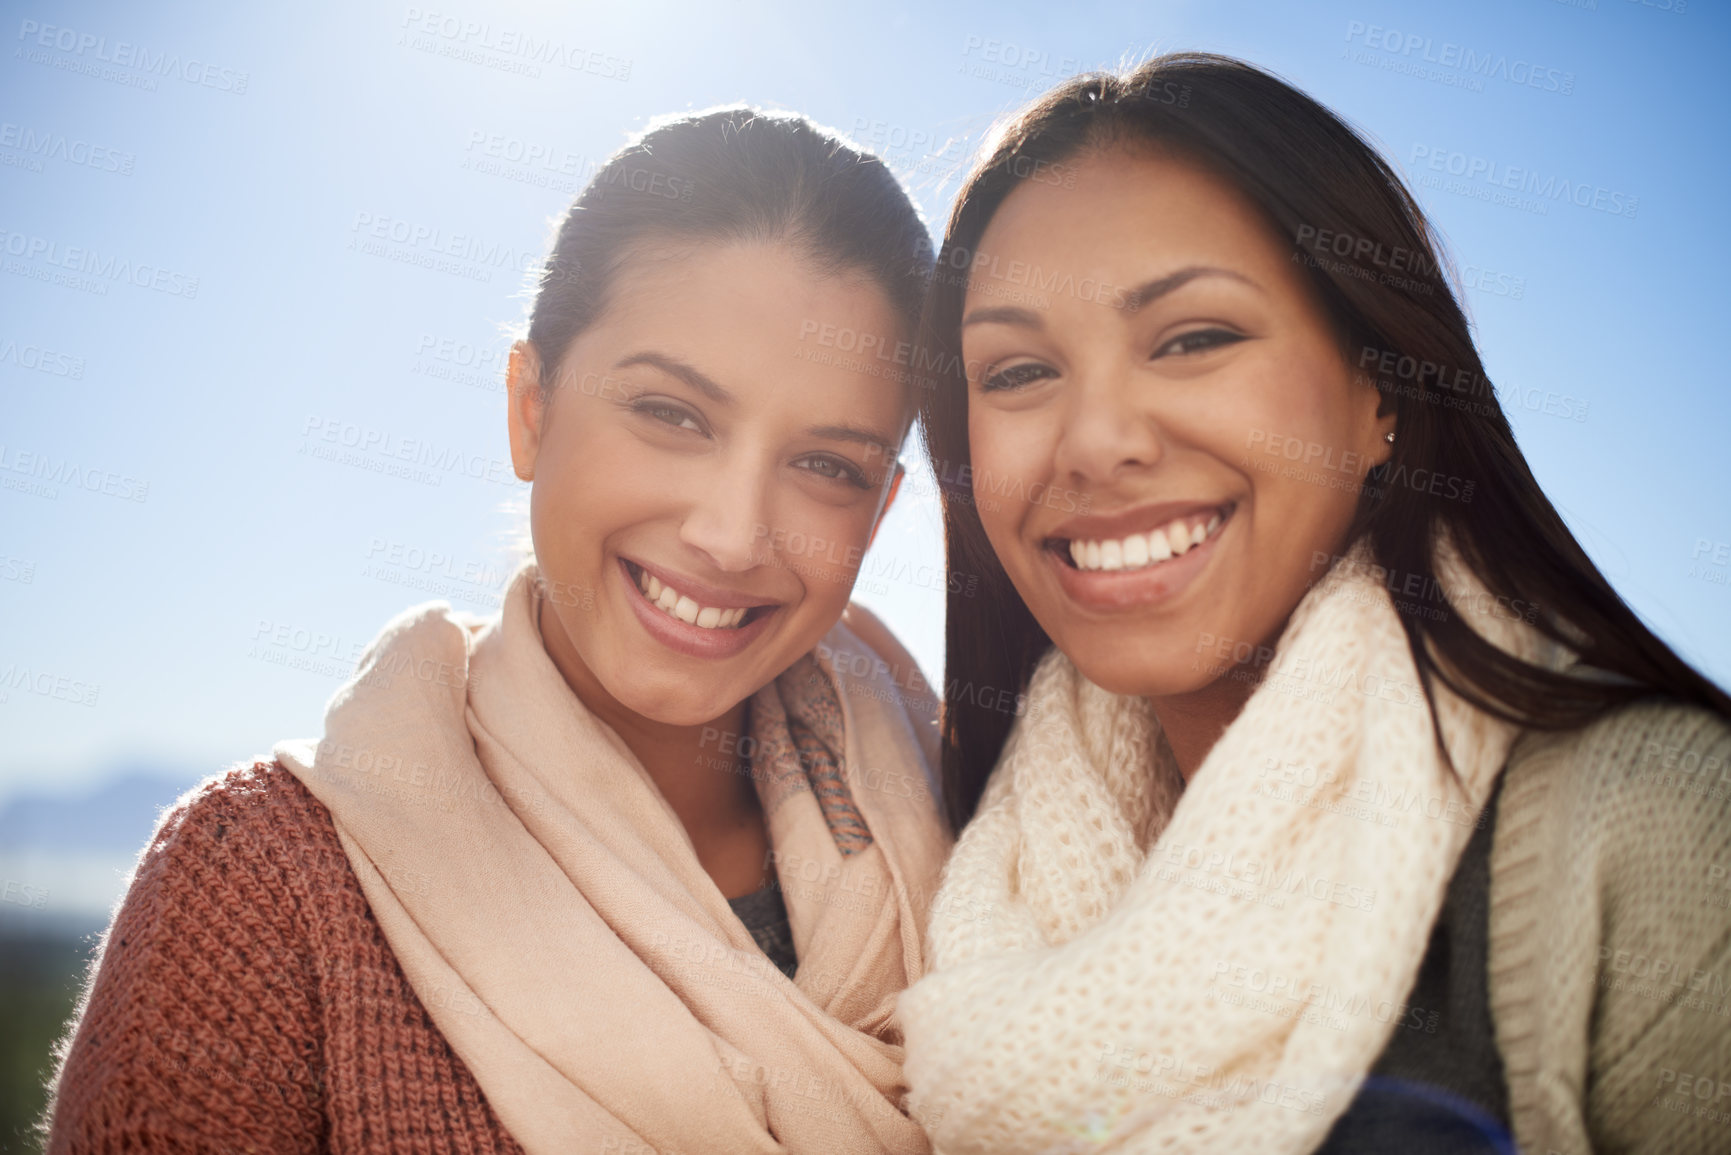 Buy stock photo Two young women smiling happily at the camera